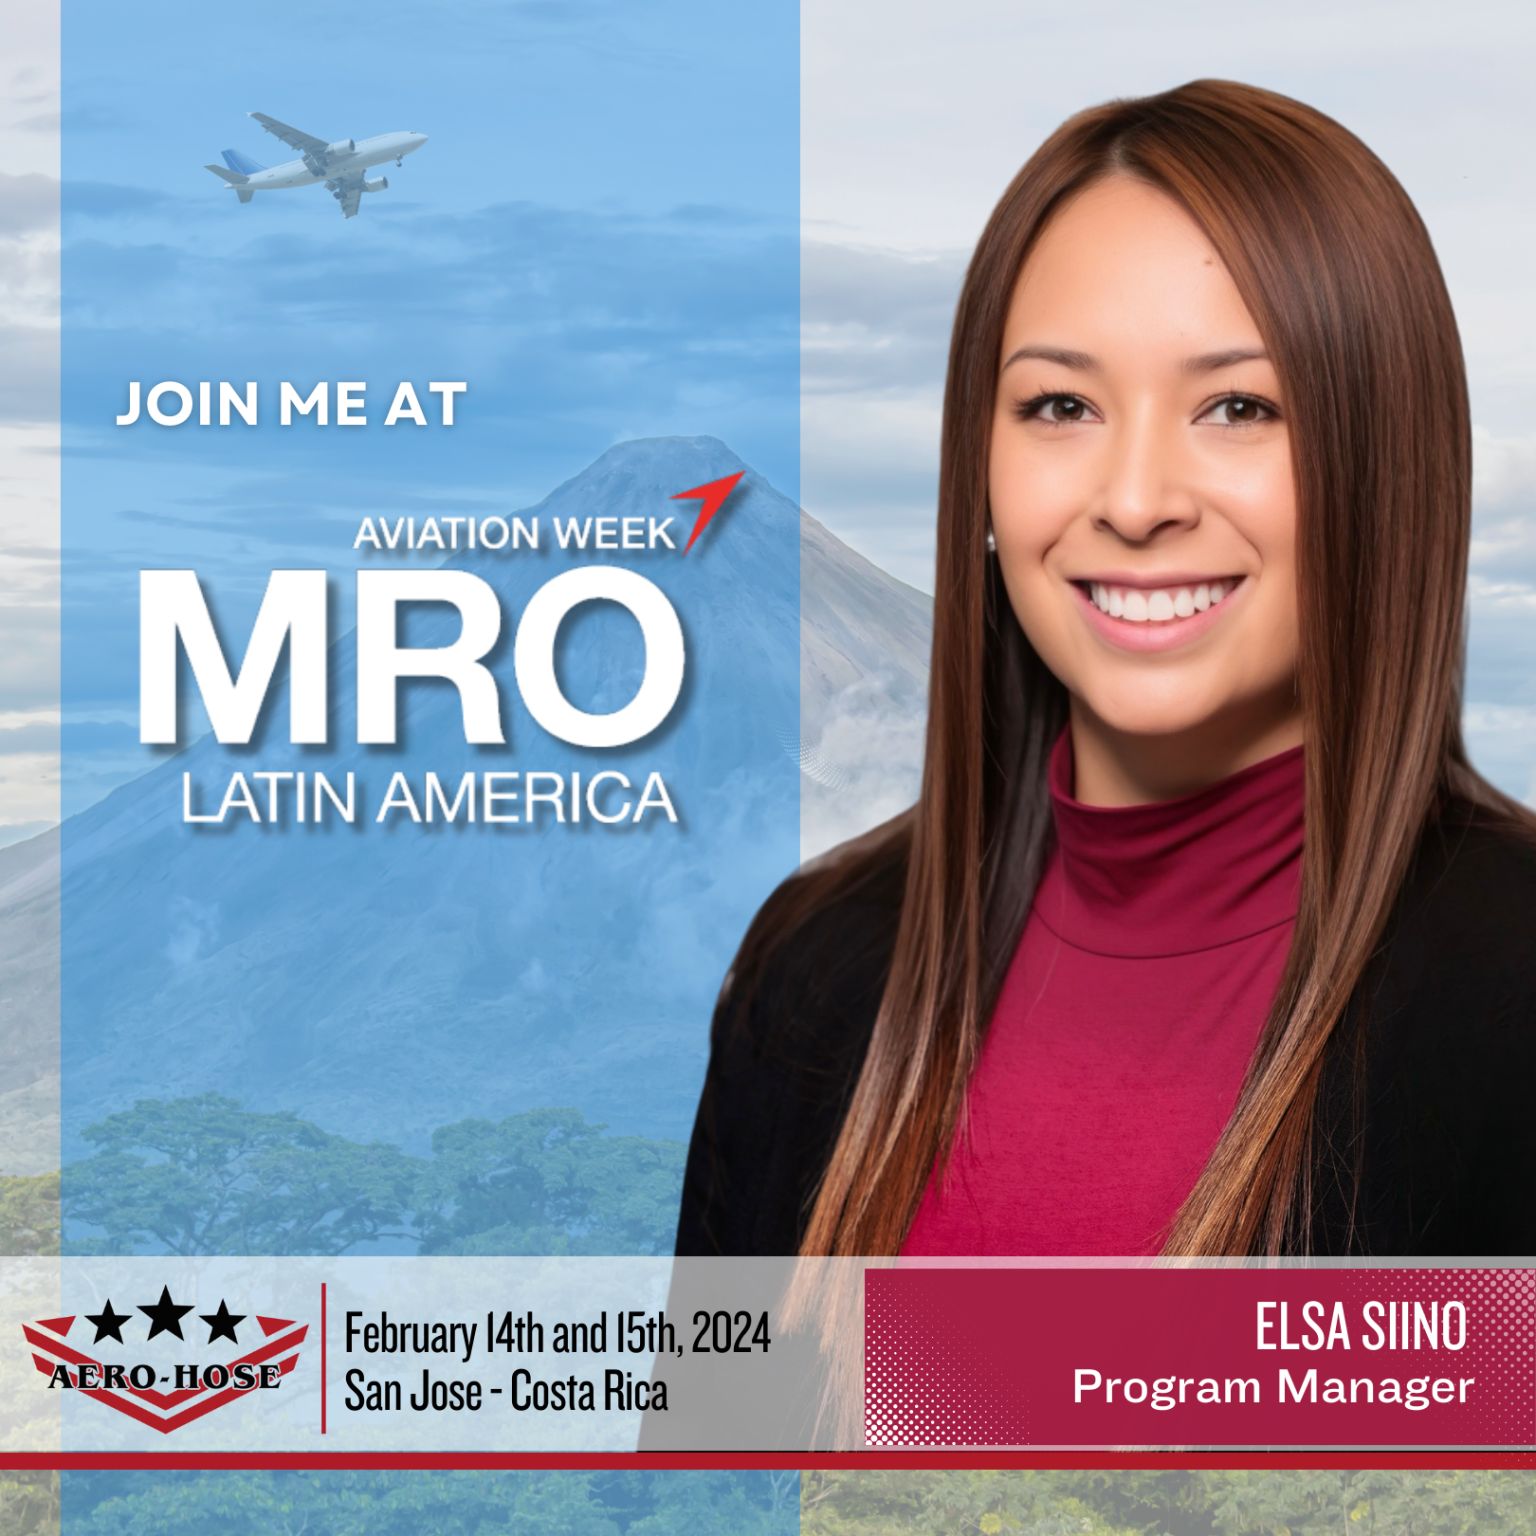 promotional graphic for aviation week's mro latin america event featuring elsa siino, program manager, with event details and a mountain backdrop. the image includes an auto draft note.